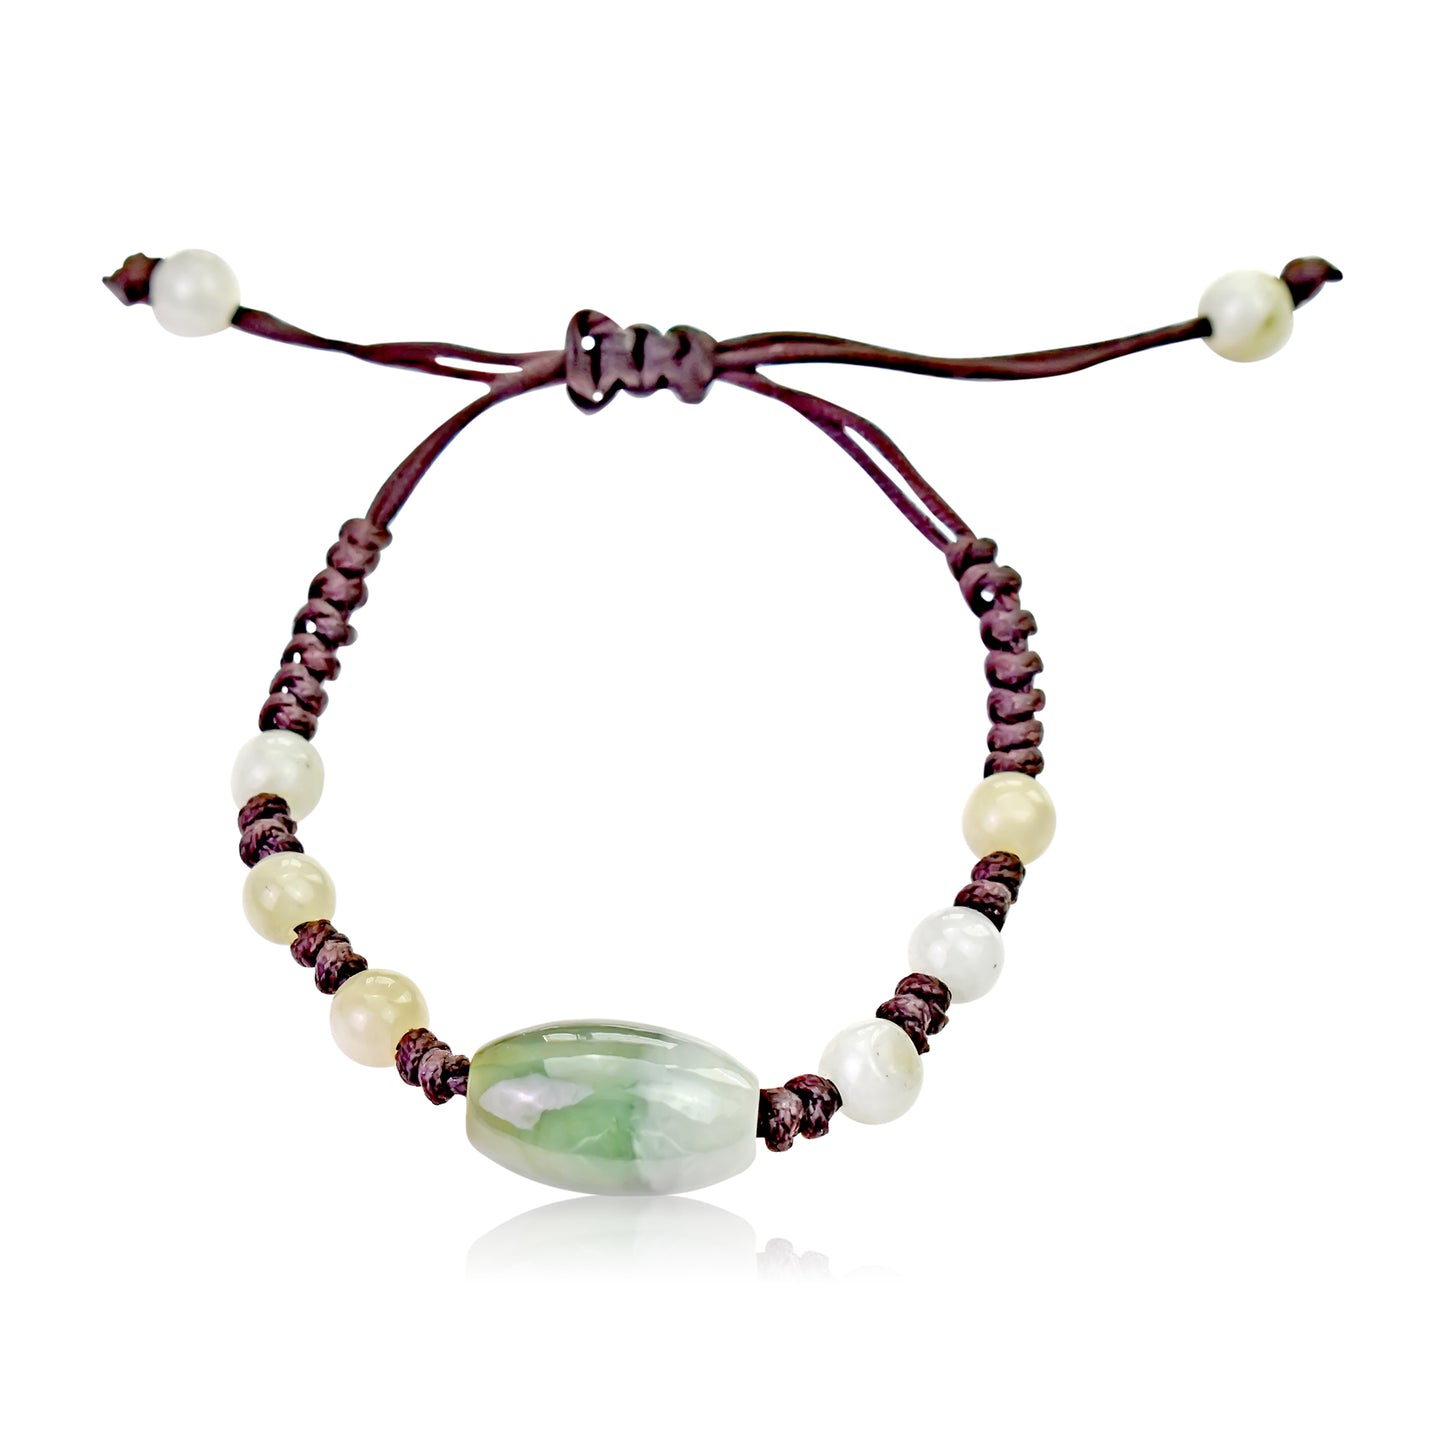 Create a Unique Look with an Oblong Shaped Beads Jade Bracelet